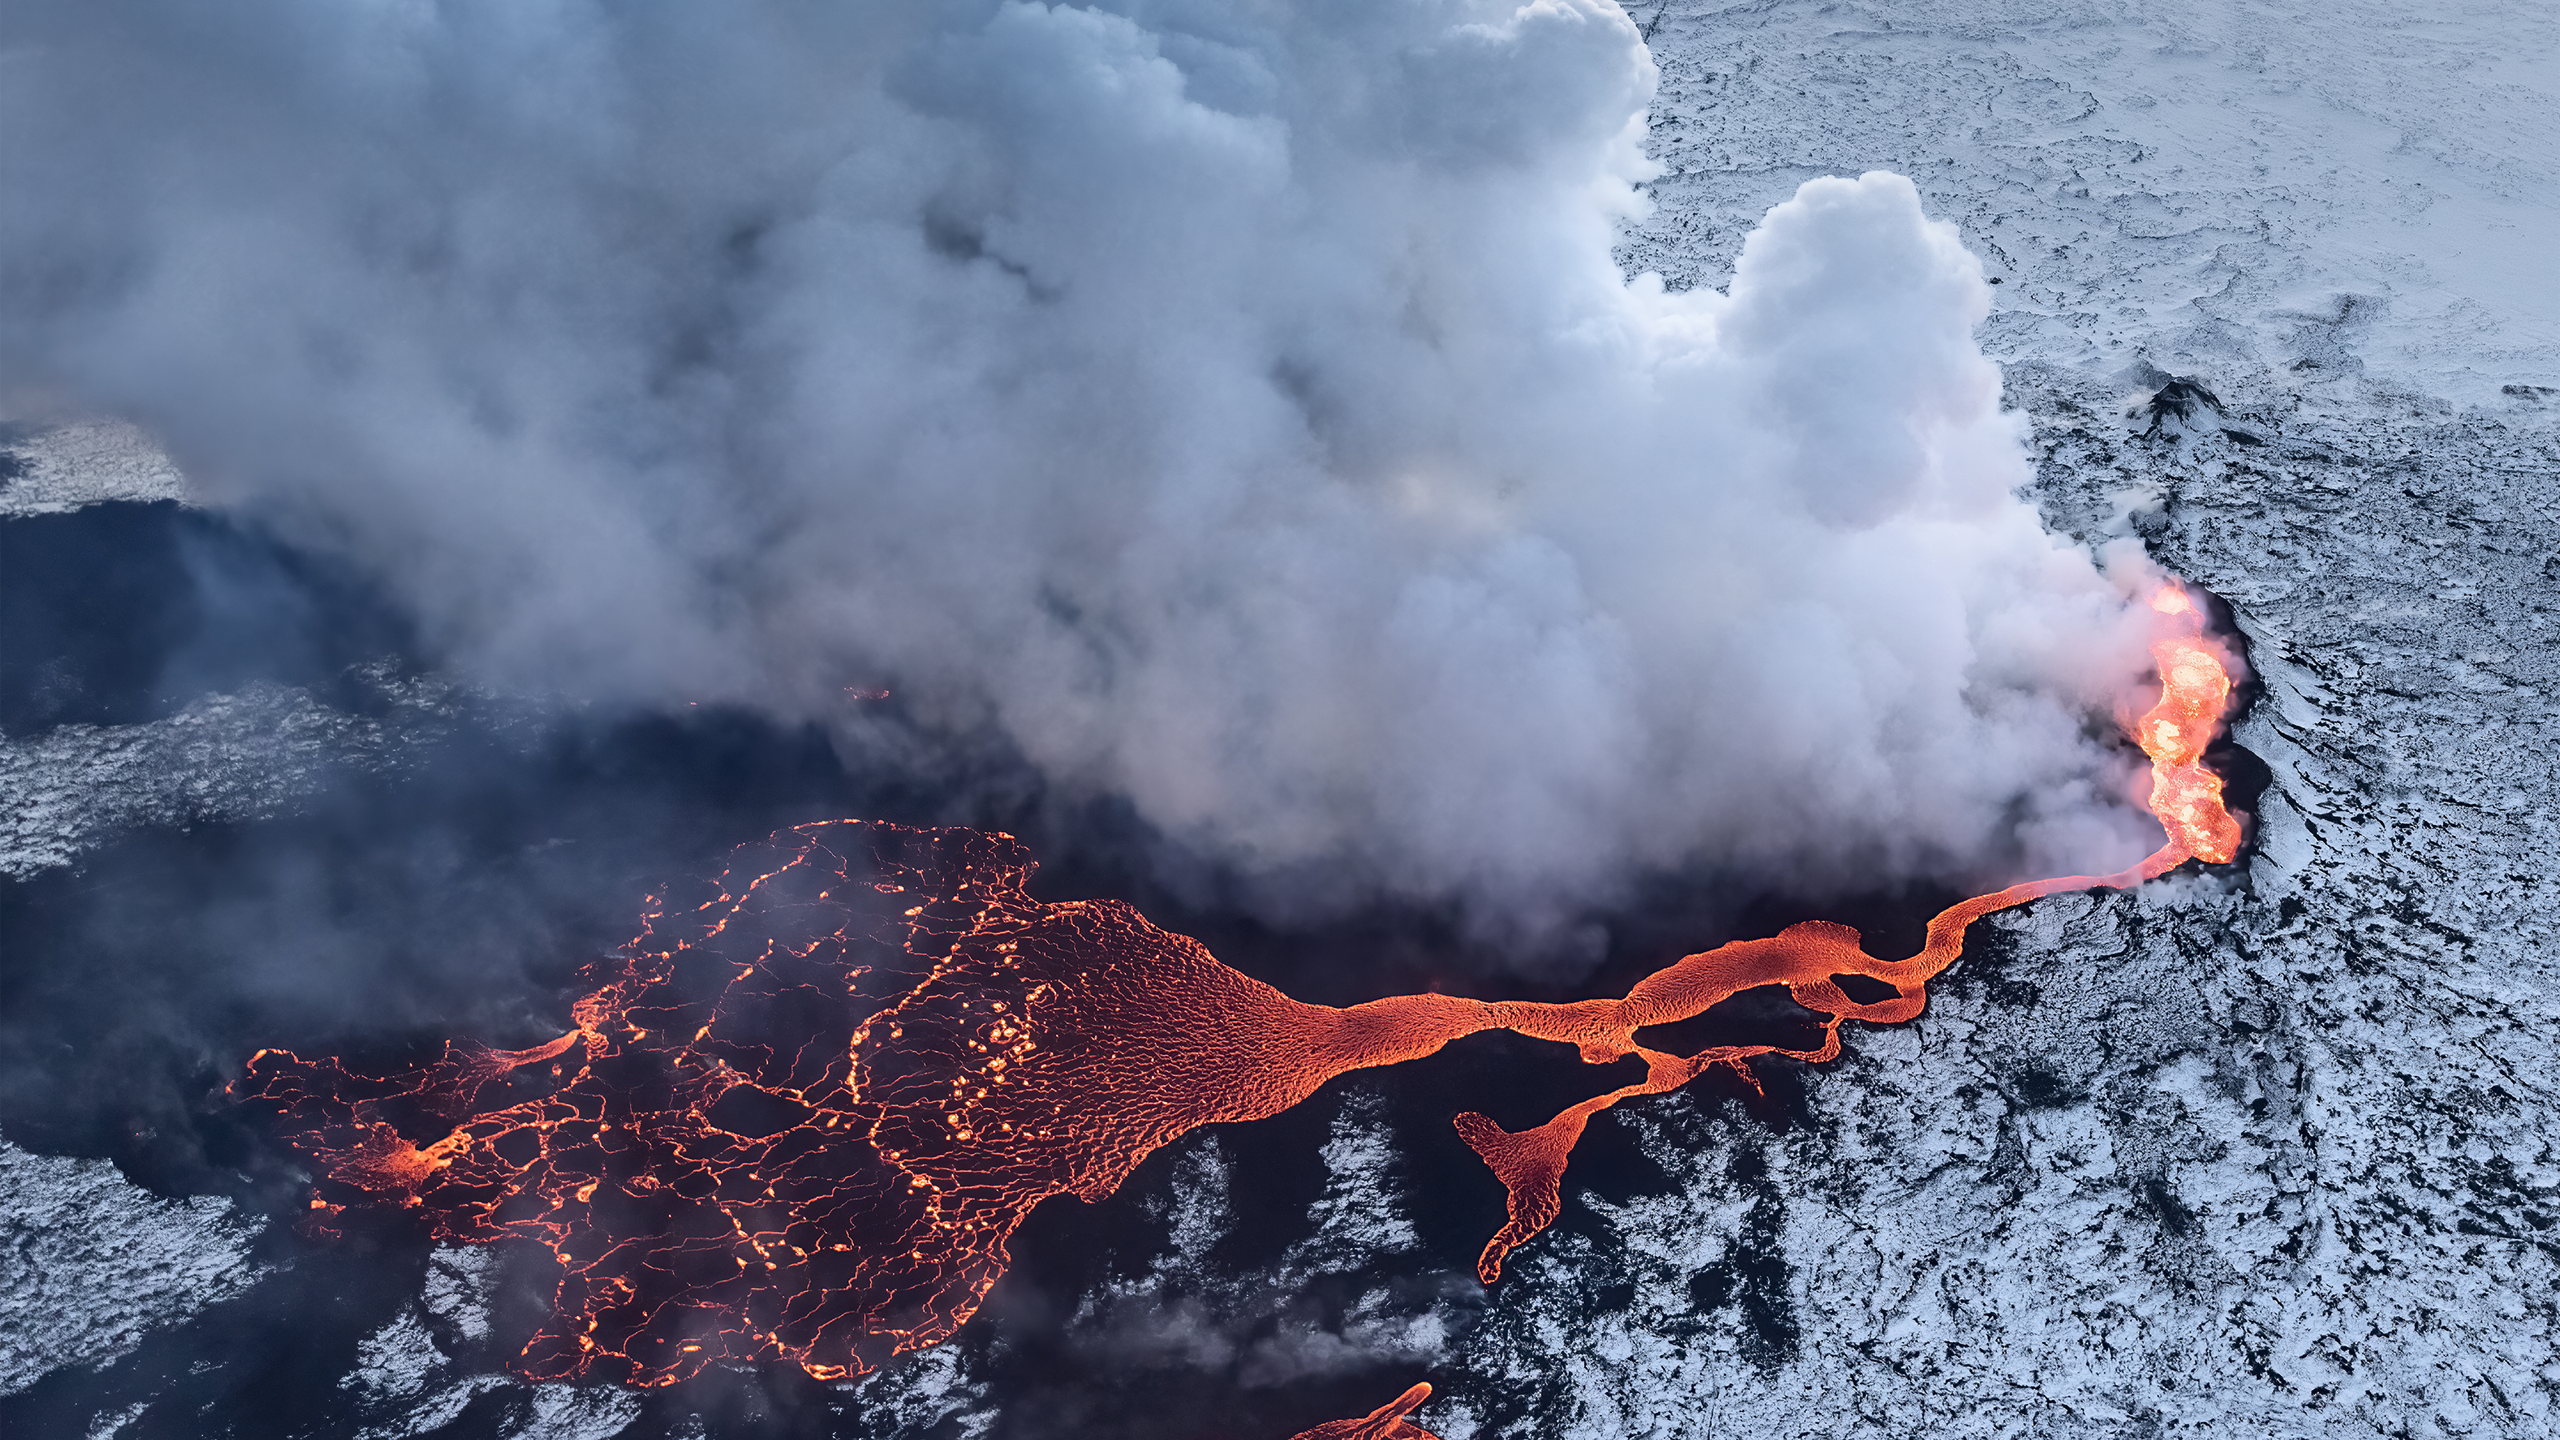 General 2560x1440 nature photography landscape volcano smoke lava mountains snow aerial view